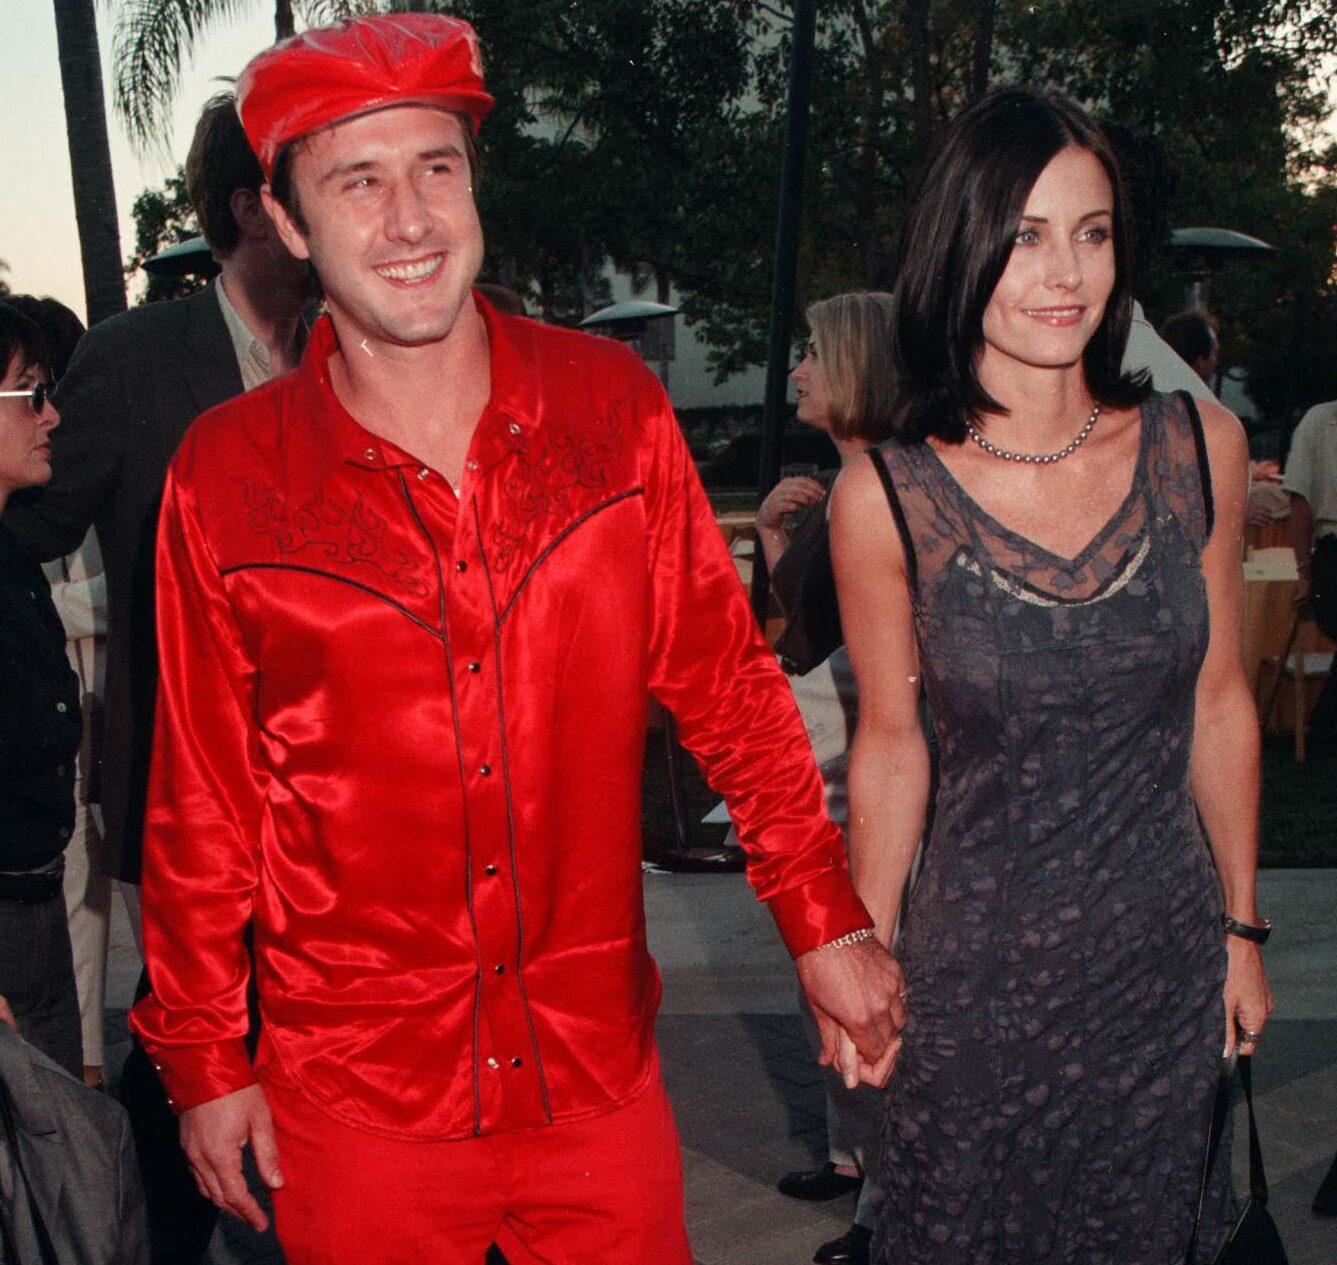 David Arquette Reveals He Felt Intimidated By Ex-Wife Courteney Cox's Fame And Success